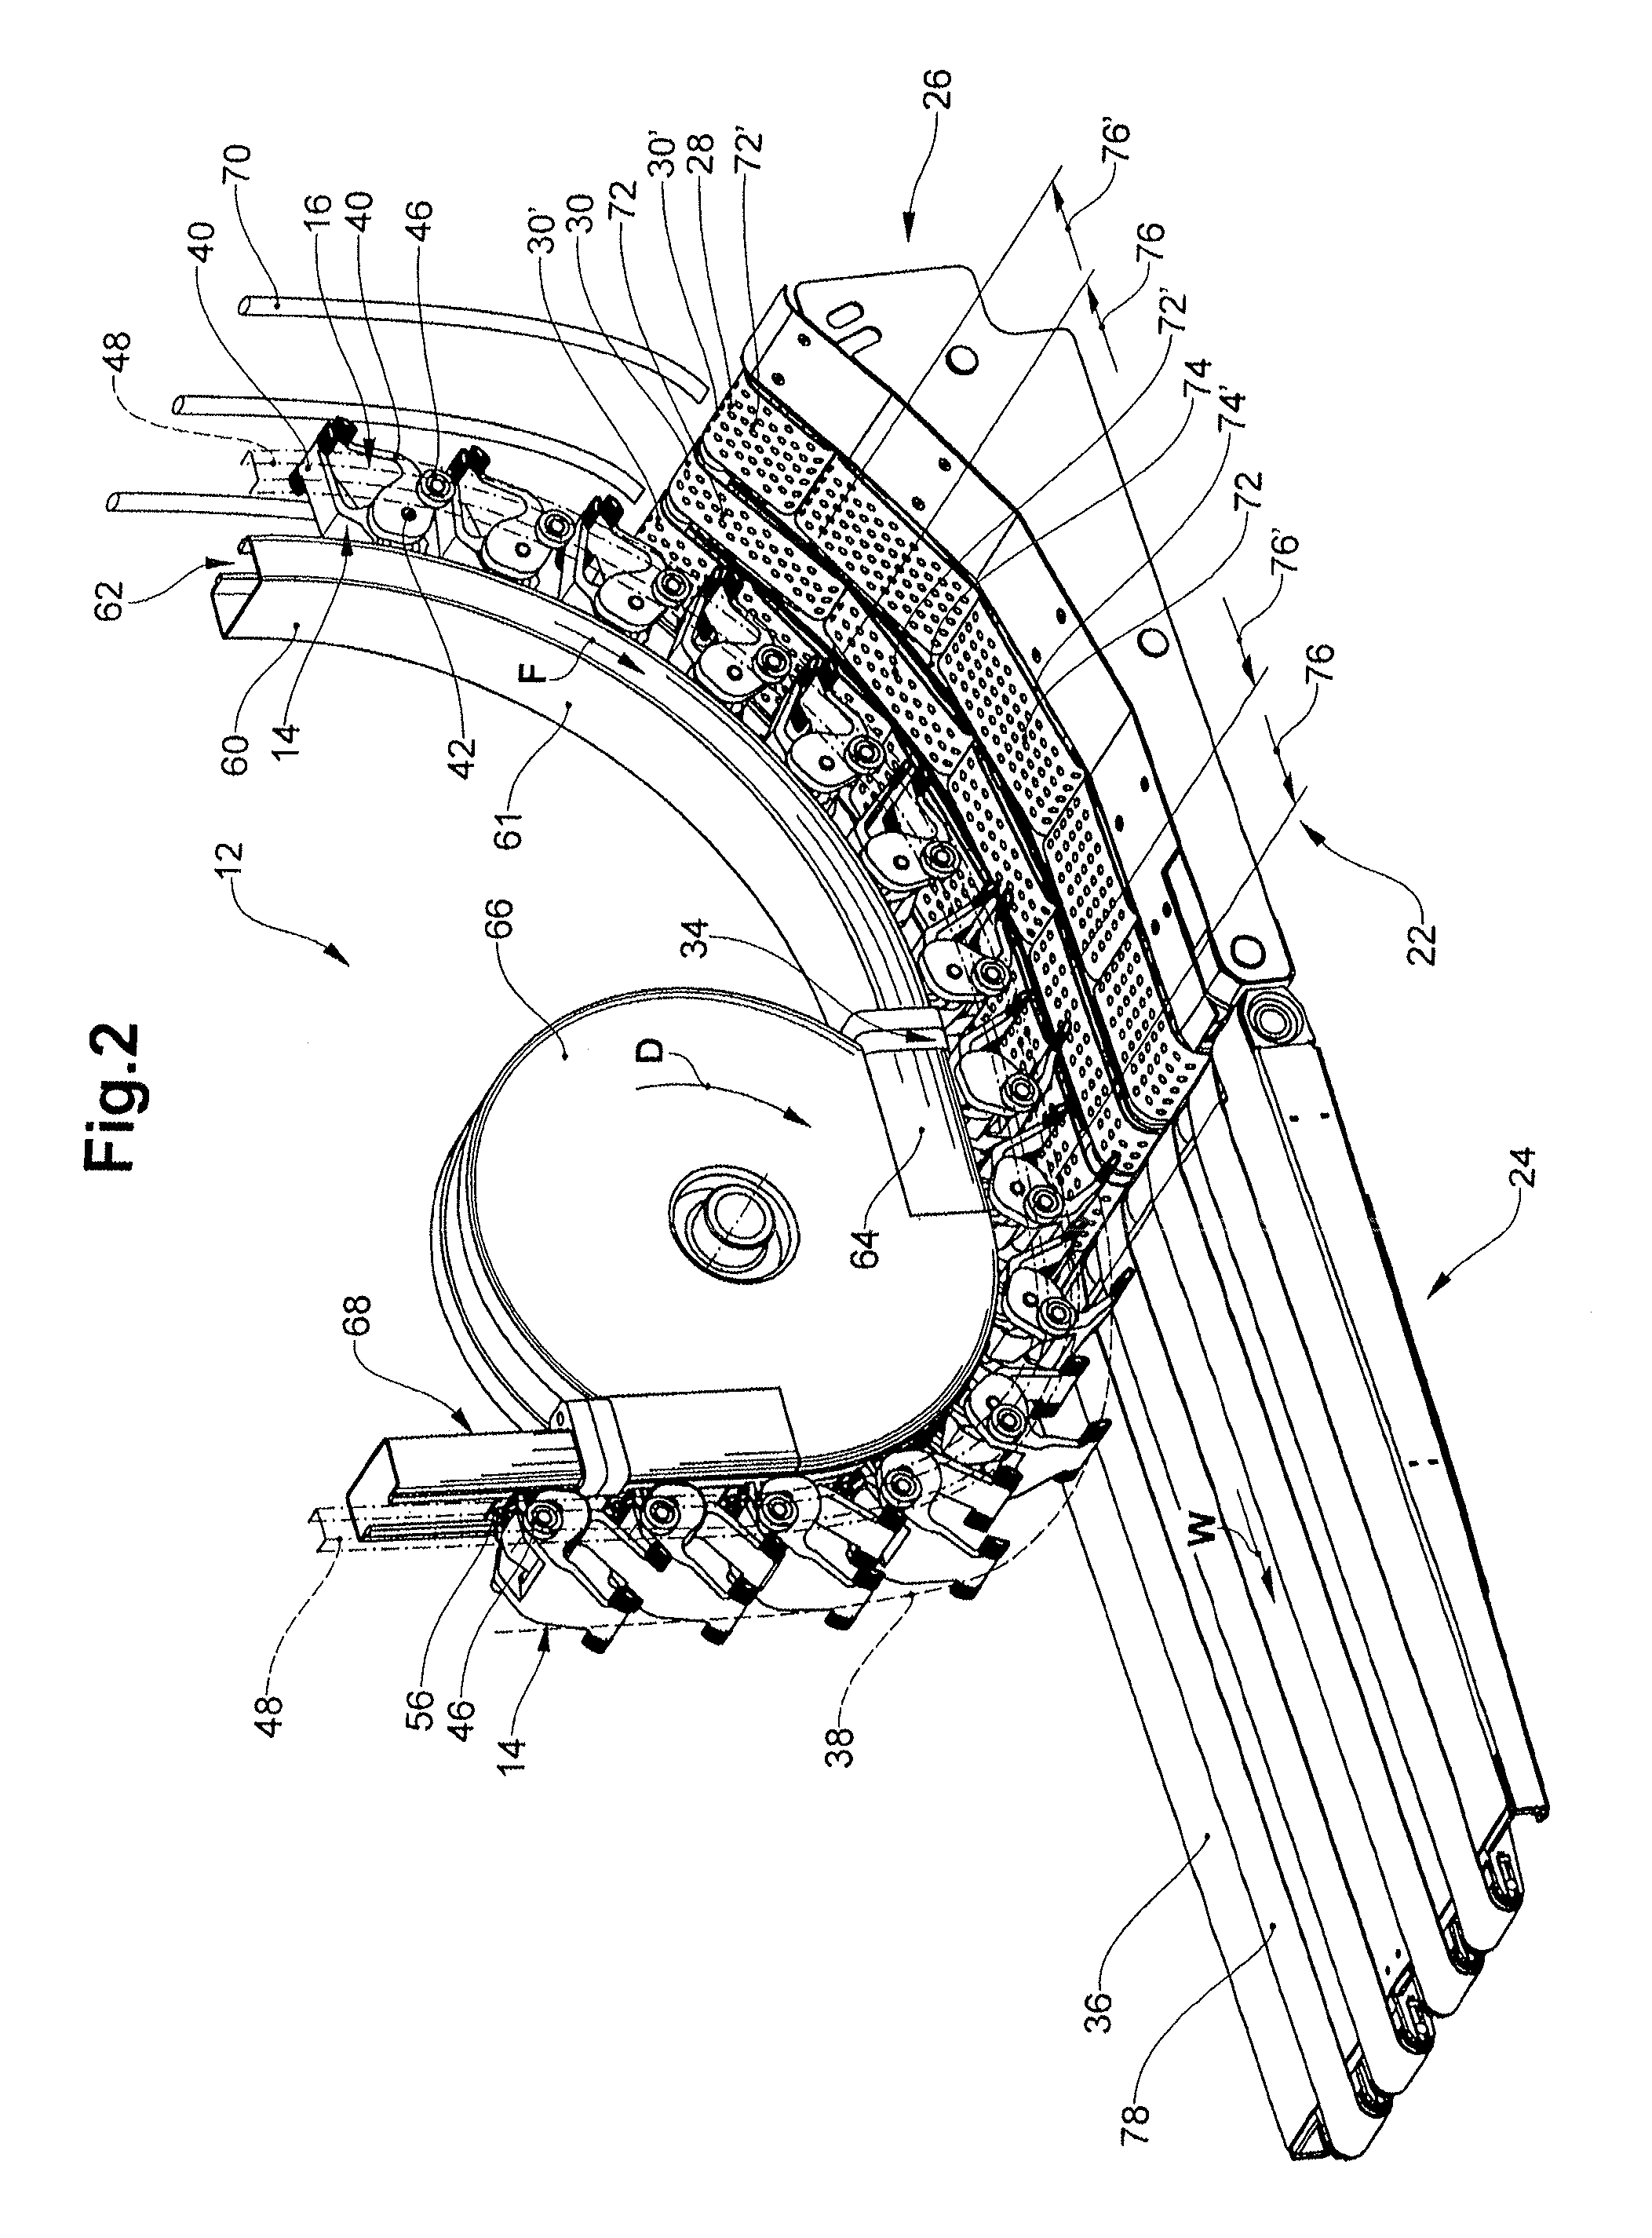 Apparatus and method for transporting flexible, planar products